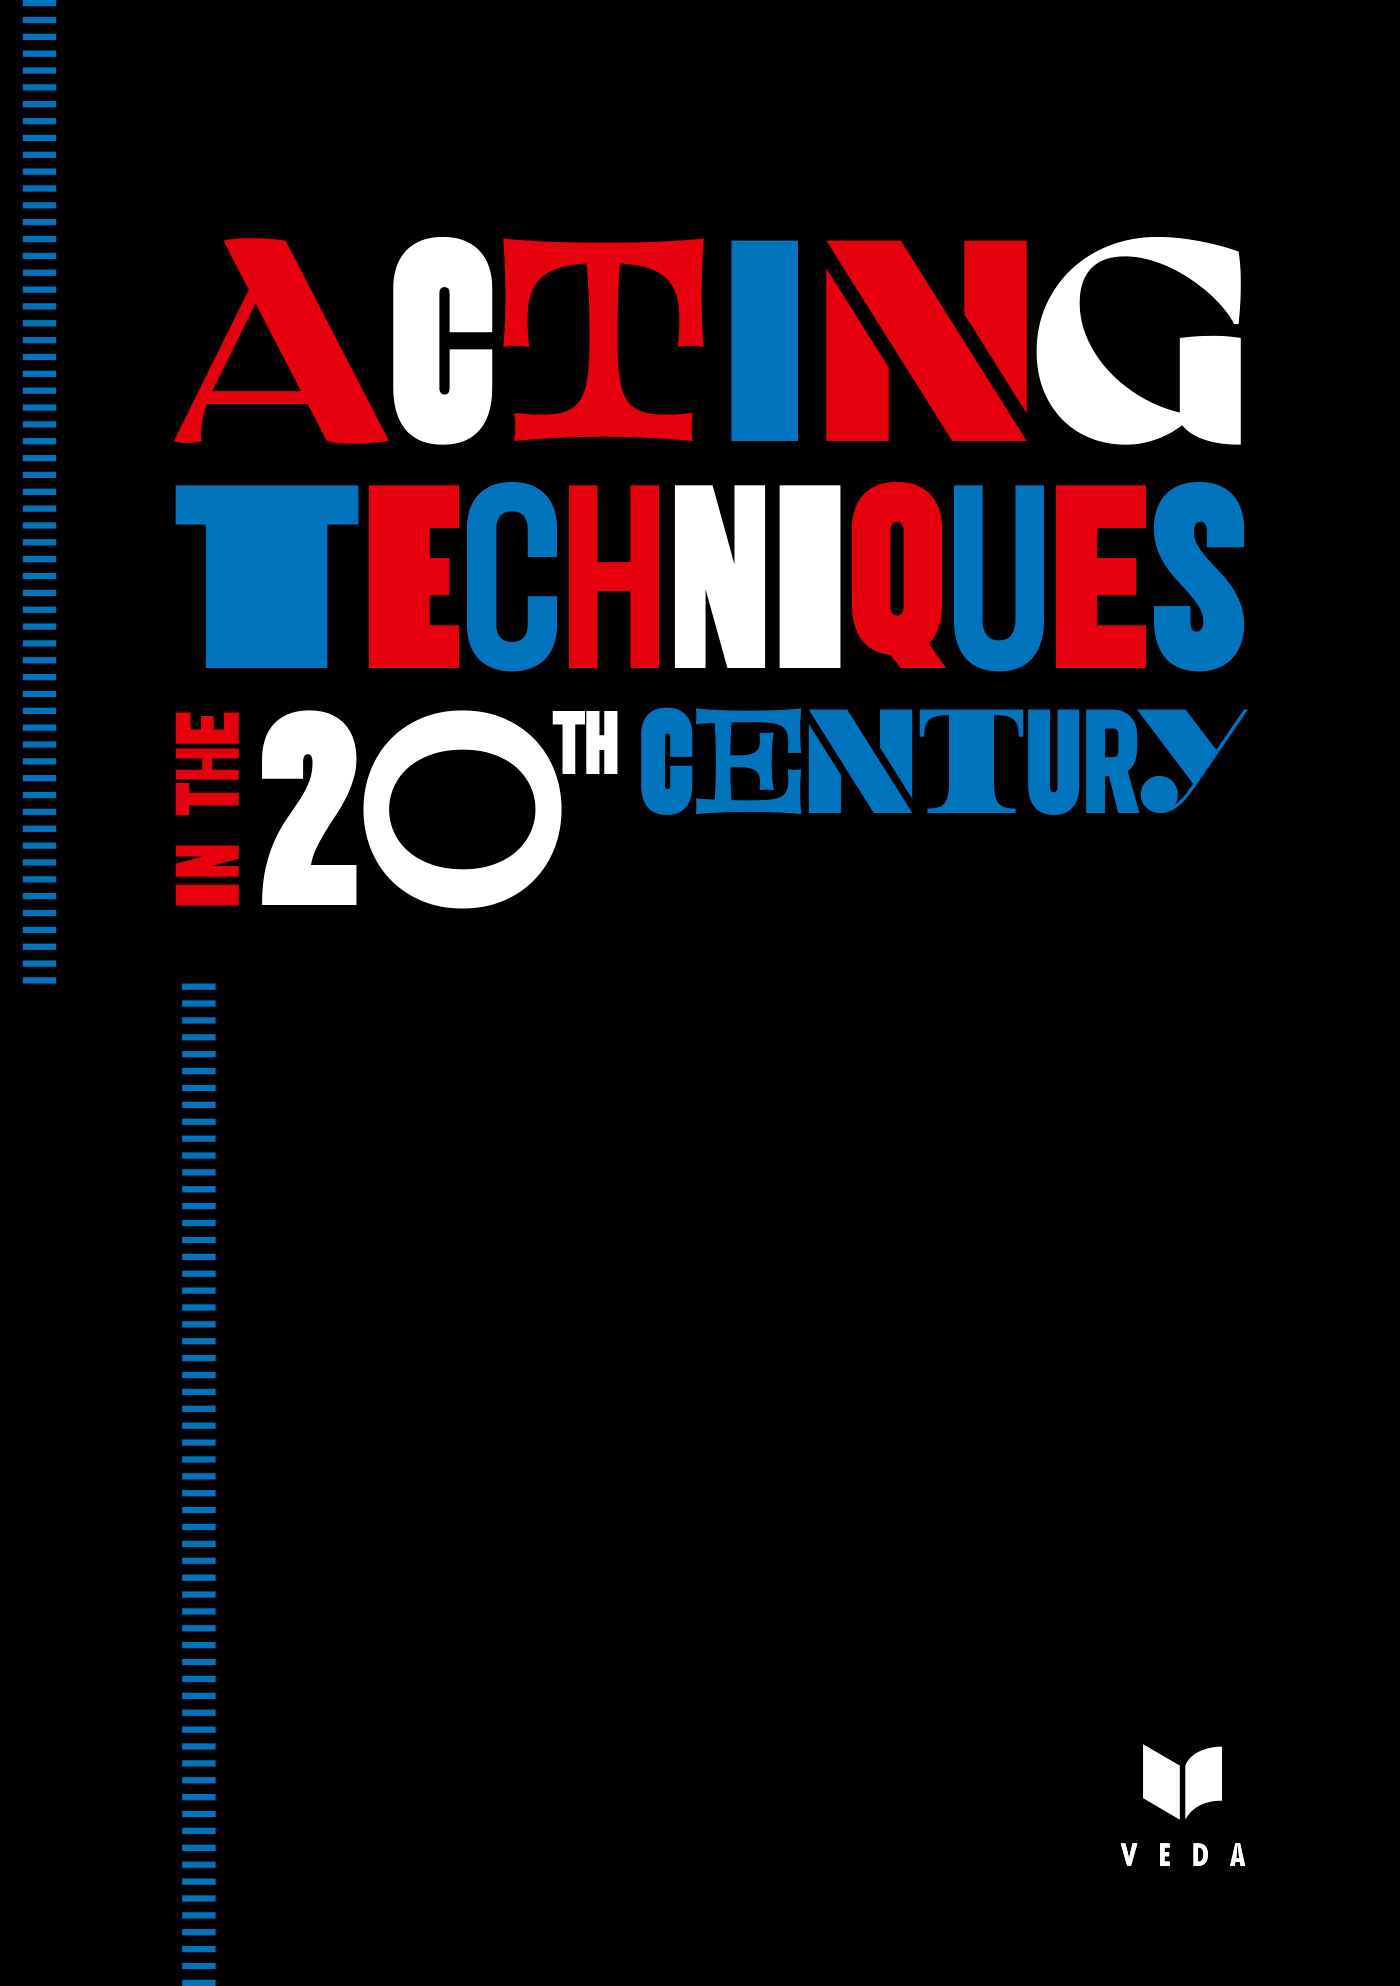 ACTING TECHNIQUES IN THE 20TH CENTURY